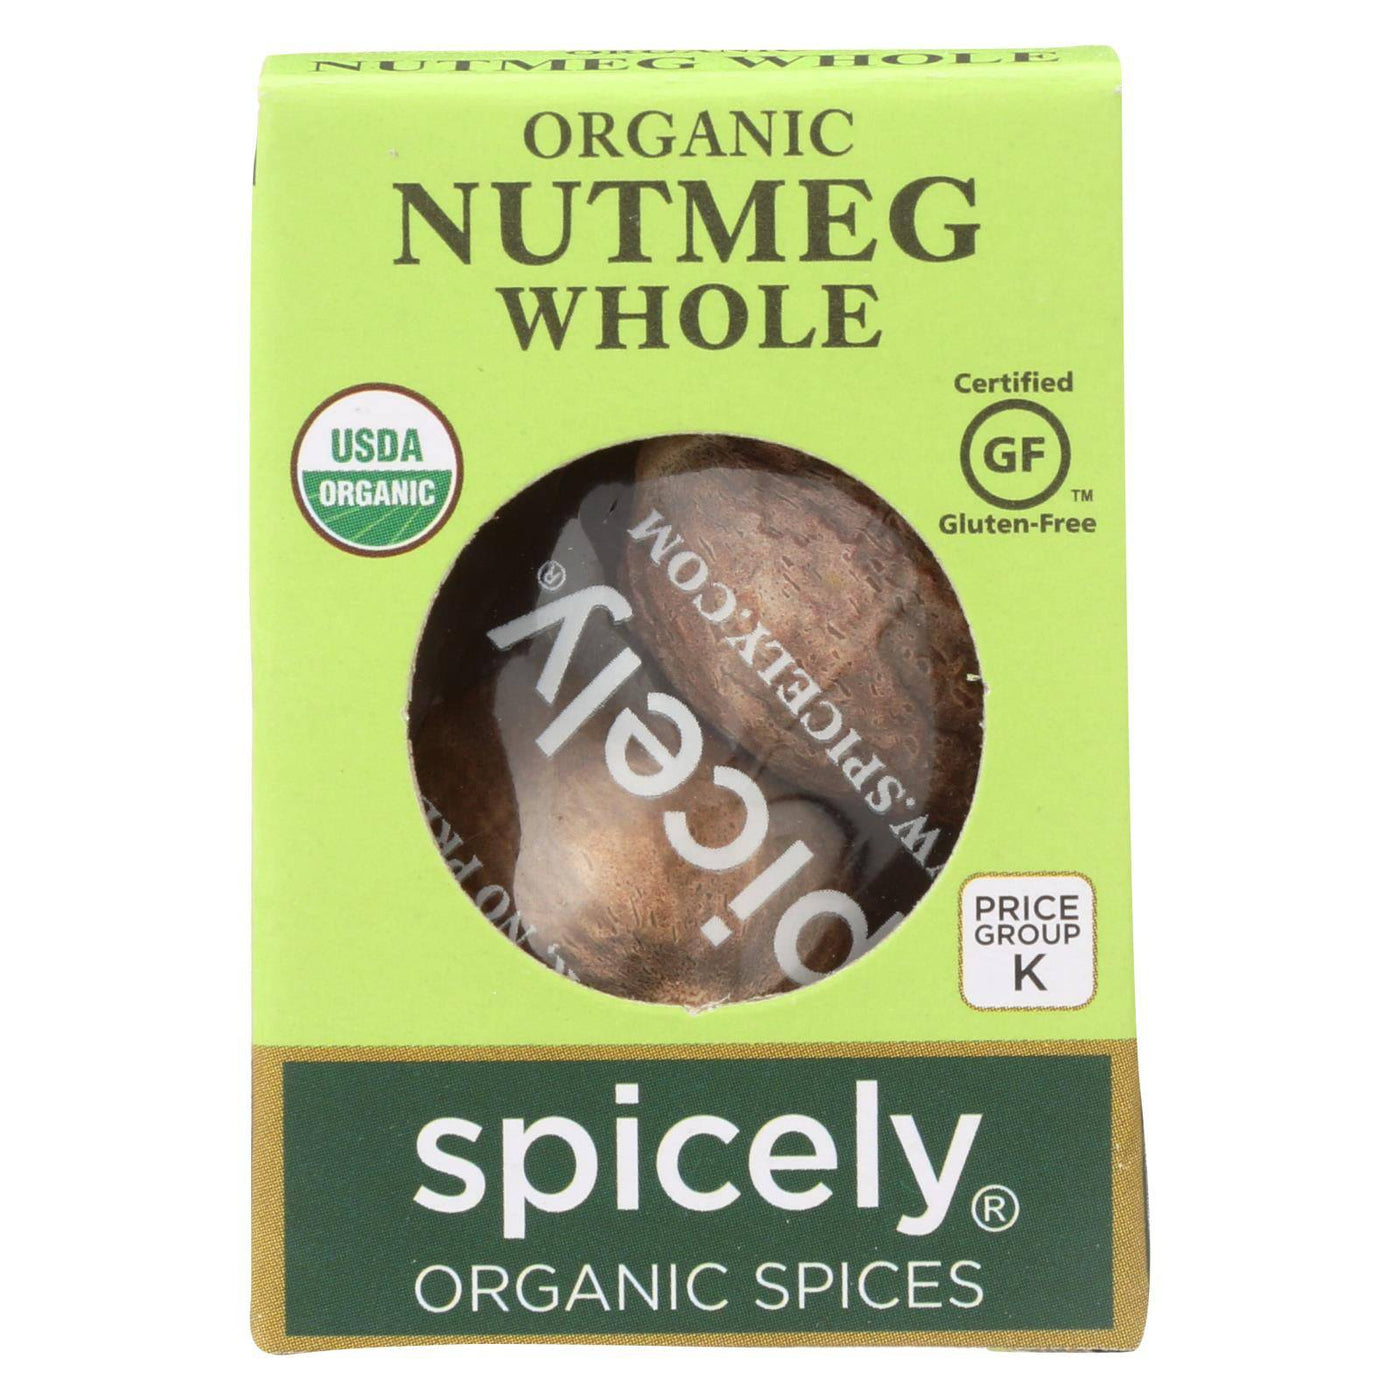 Buy Spicely Organics - Organic Nutmeg - Whole - Case Of 6 - 0.1 Oz.  at OnlyNaturals.us